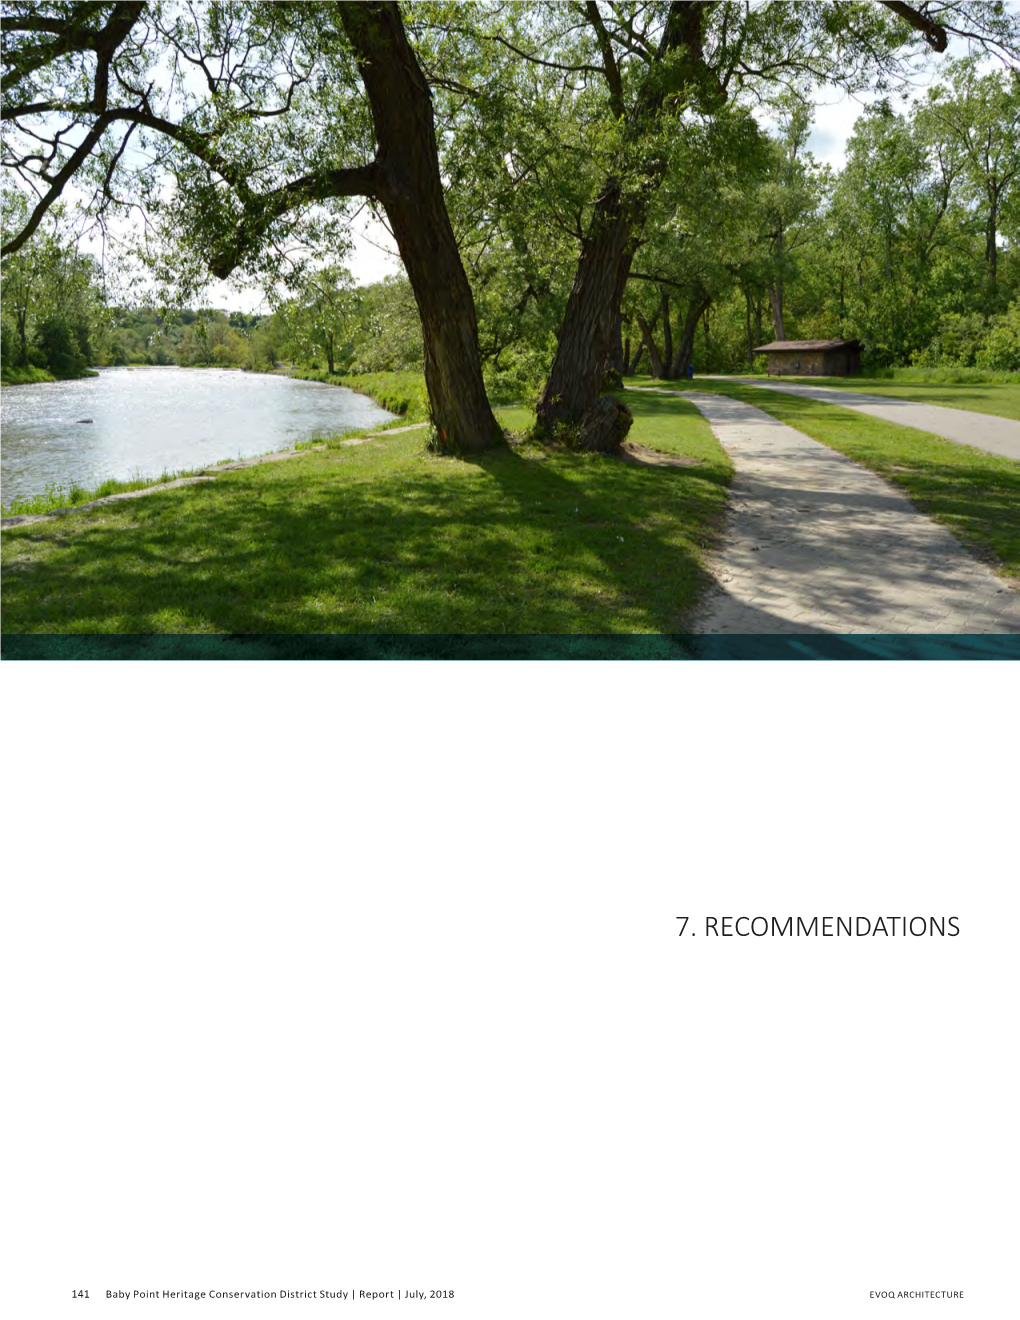 Baby Point Heritage Conservation District Study | Report | July, 2018 EVOQ ARCHITECTURE RECOMMENDATIONS